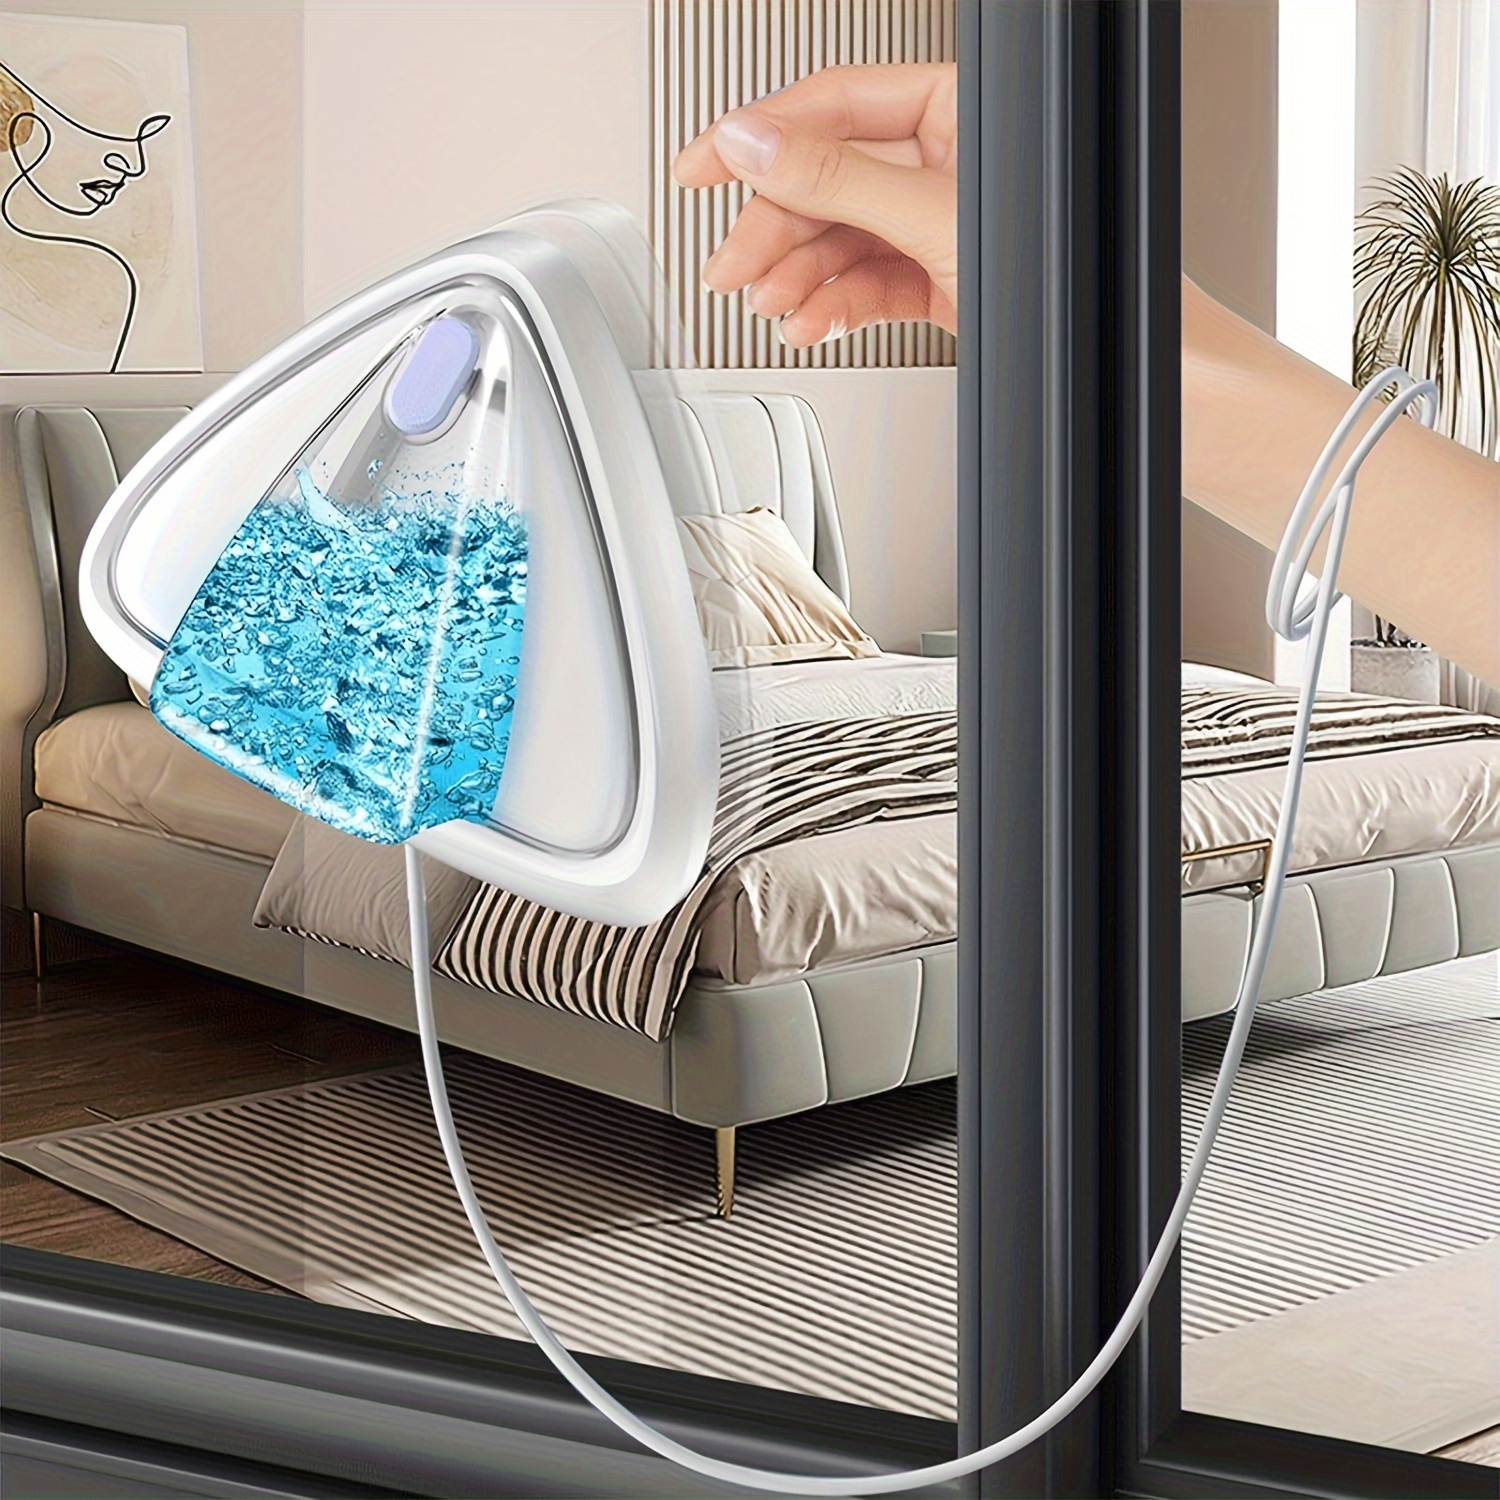 Magnetic Window Cleaner - EthioSuQ Online Shopping